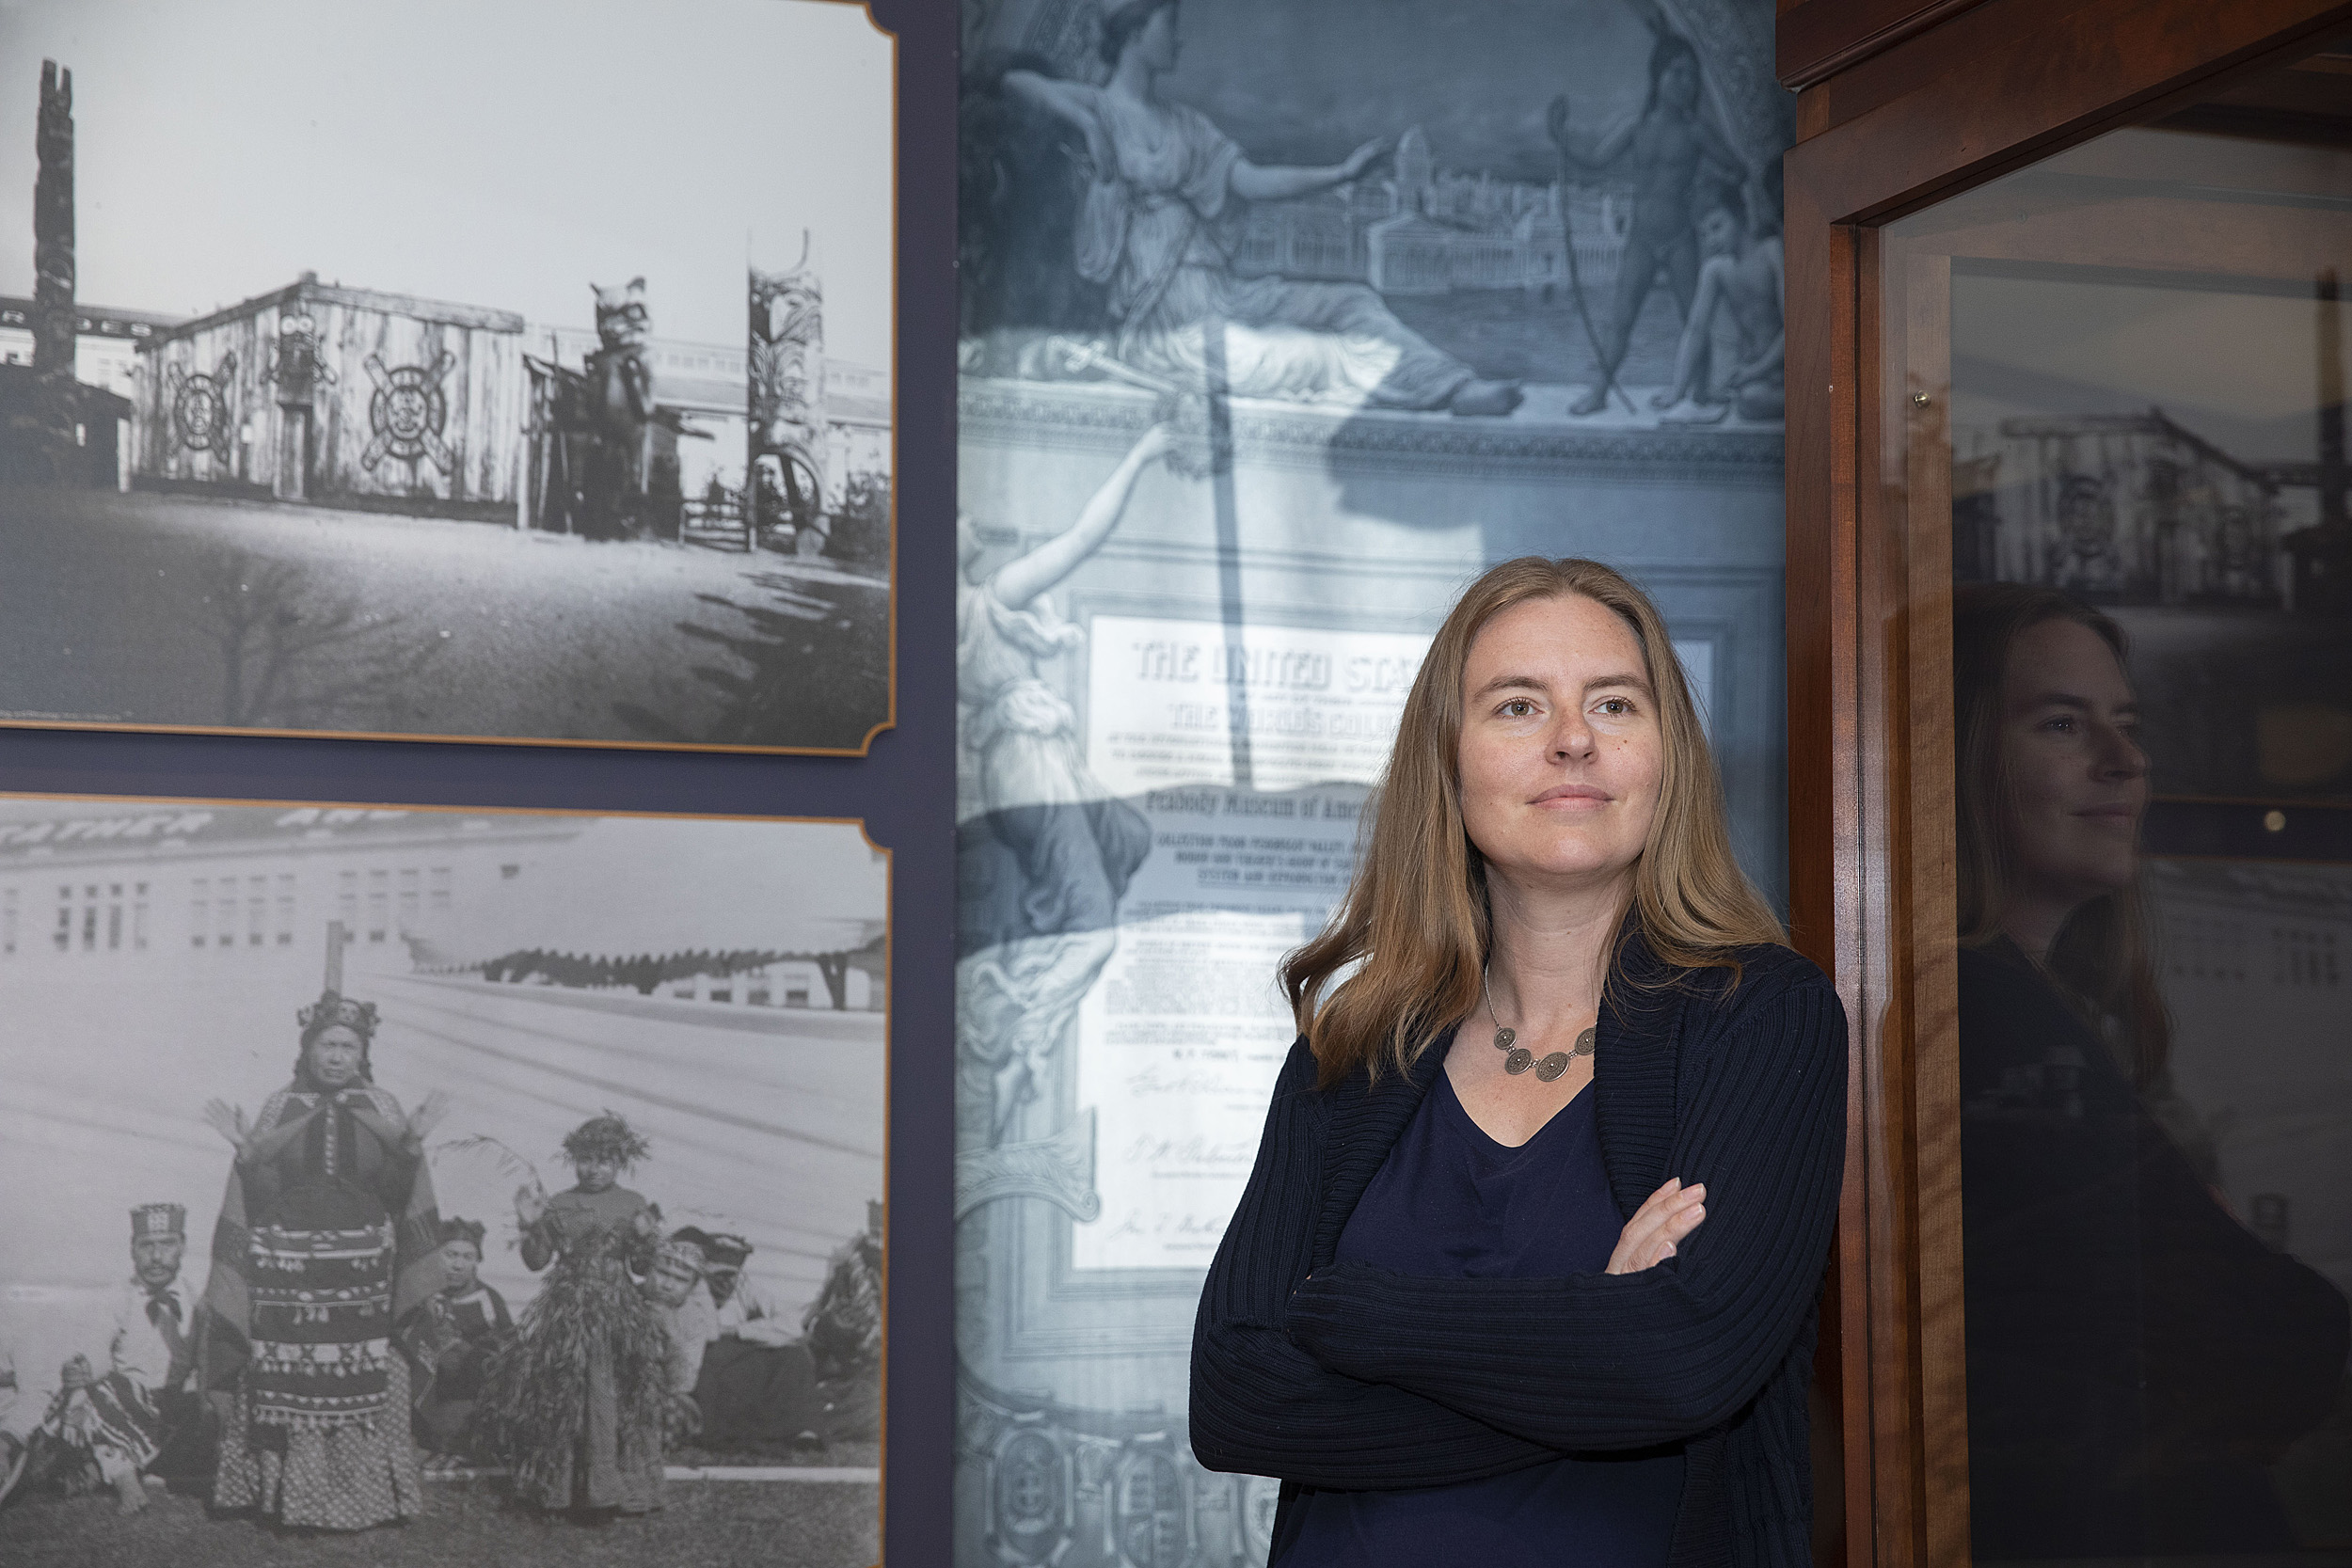 Christina Warinner is a new faculty member photographed in front of a display at the Peabody Museum.